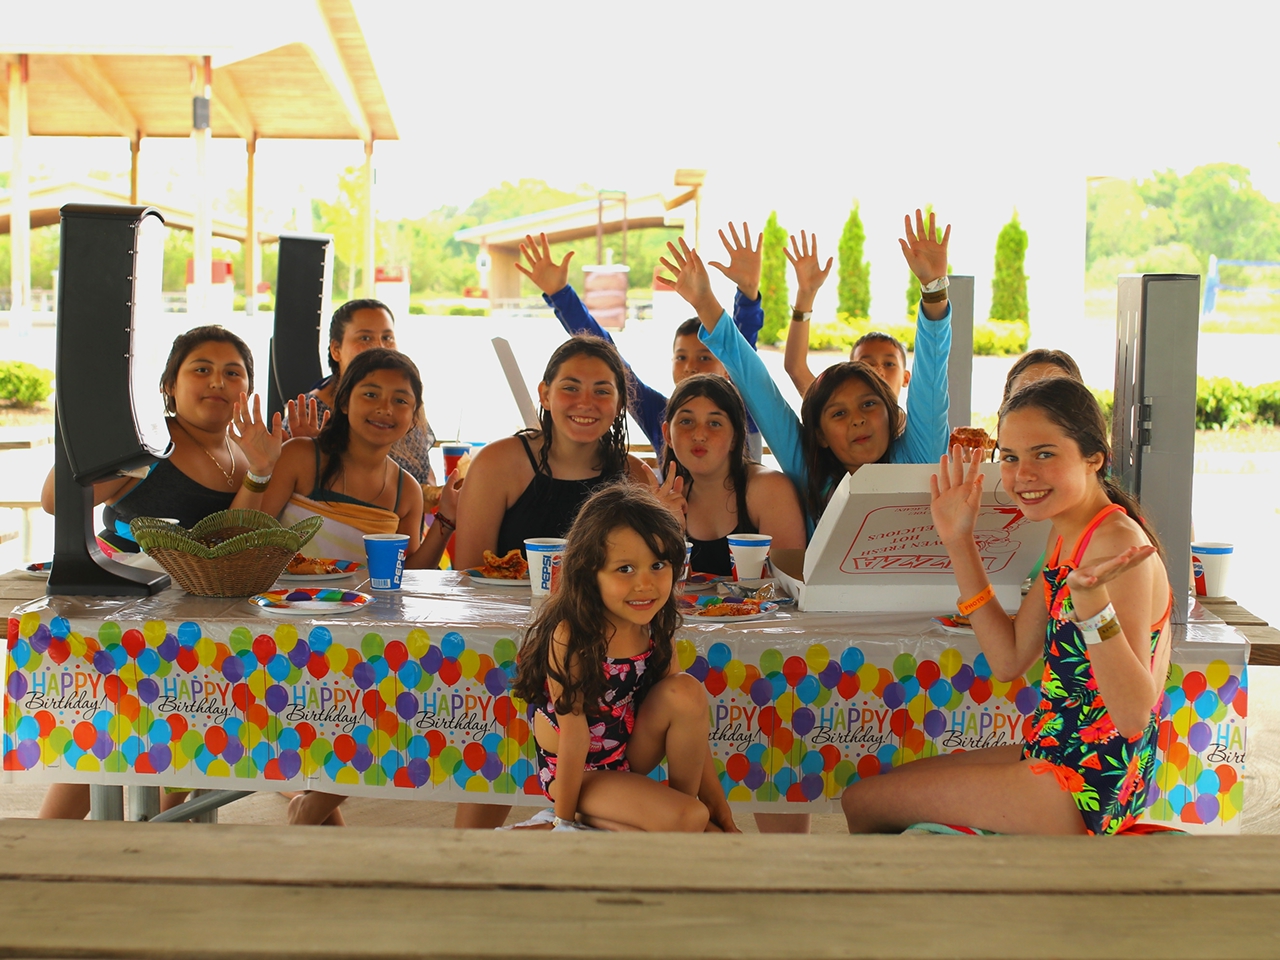 Group of children celebrating a birthday at a picnic table